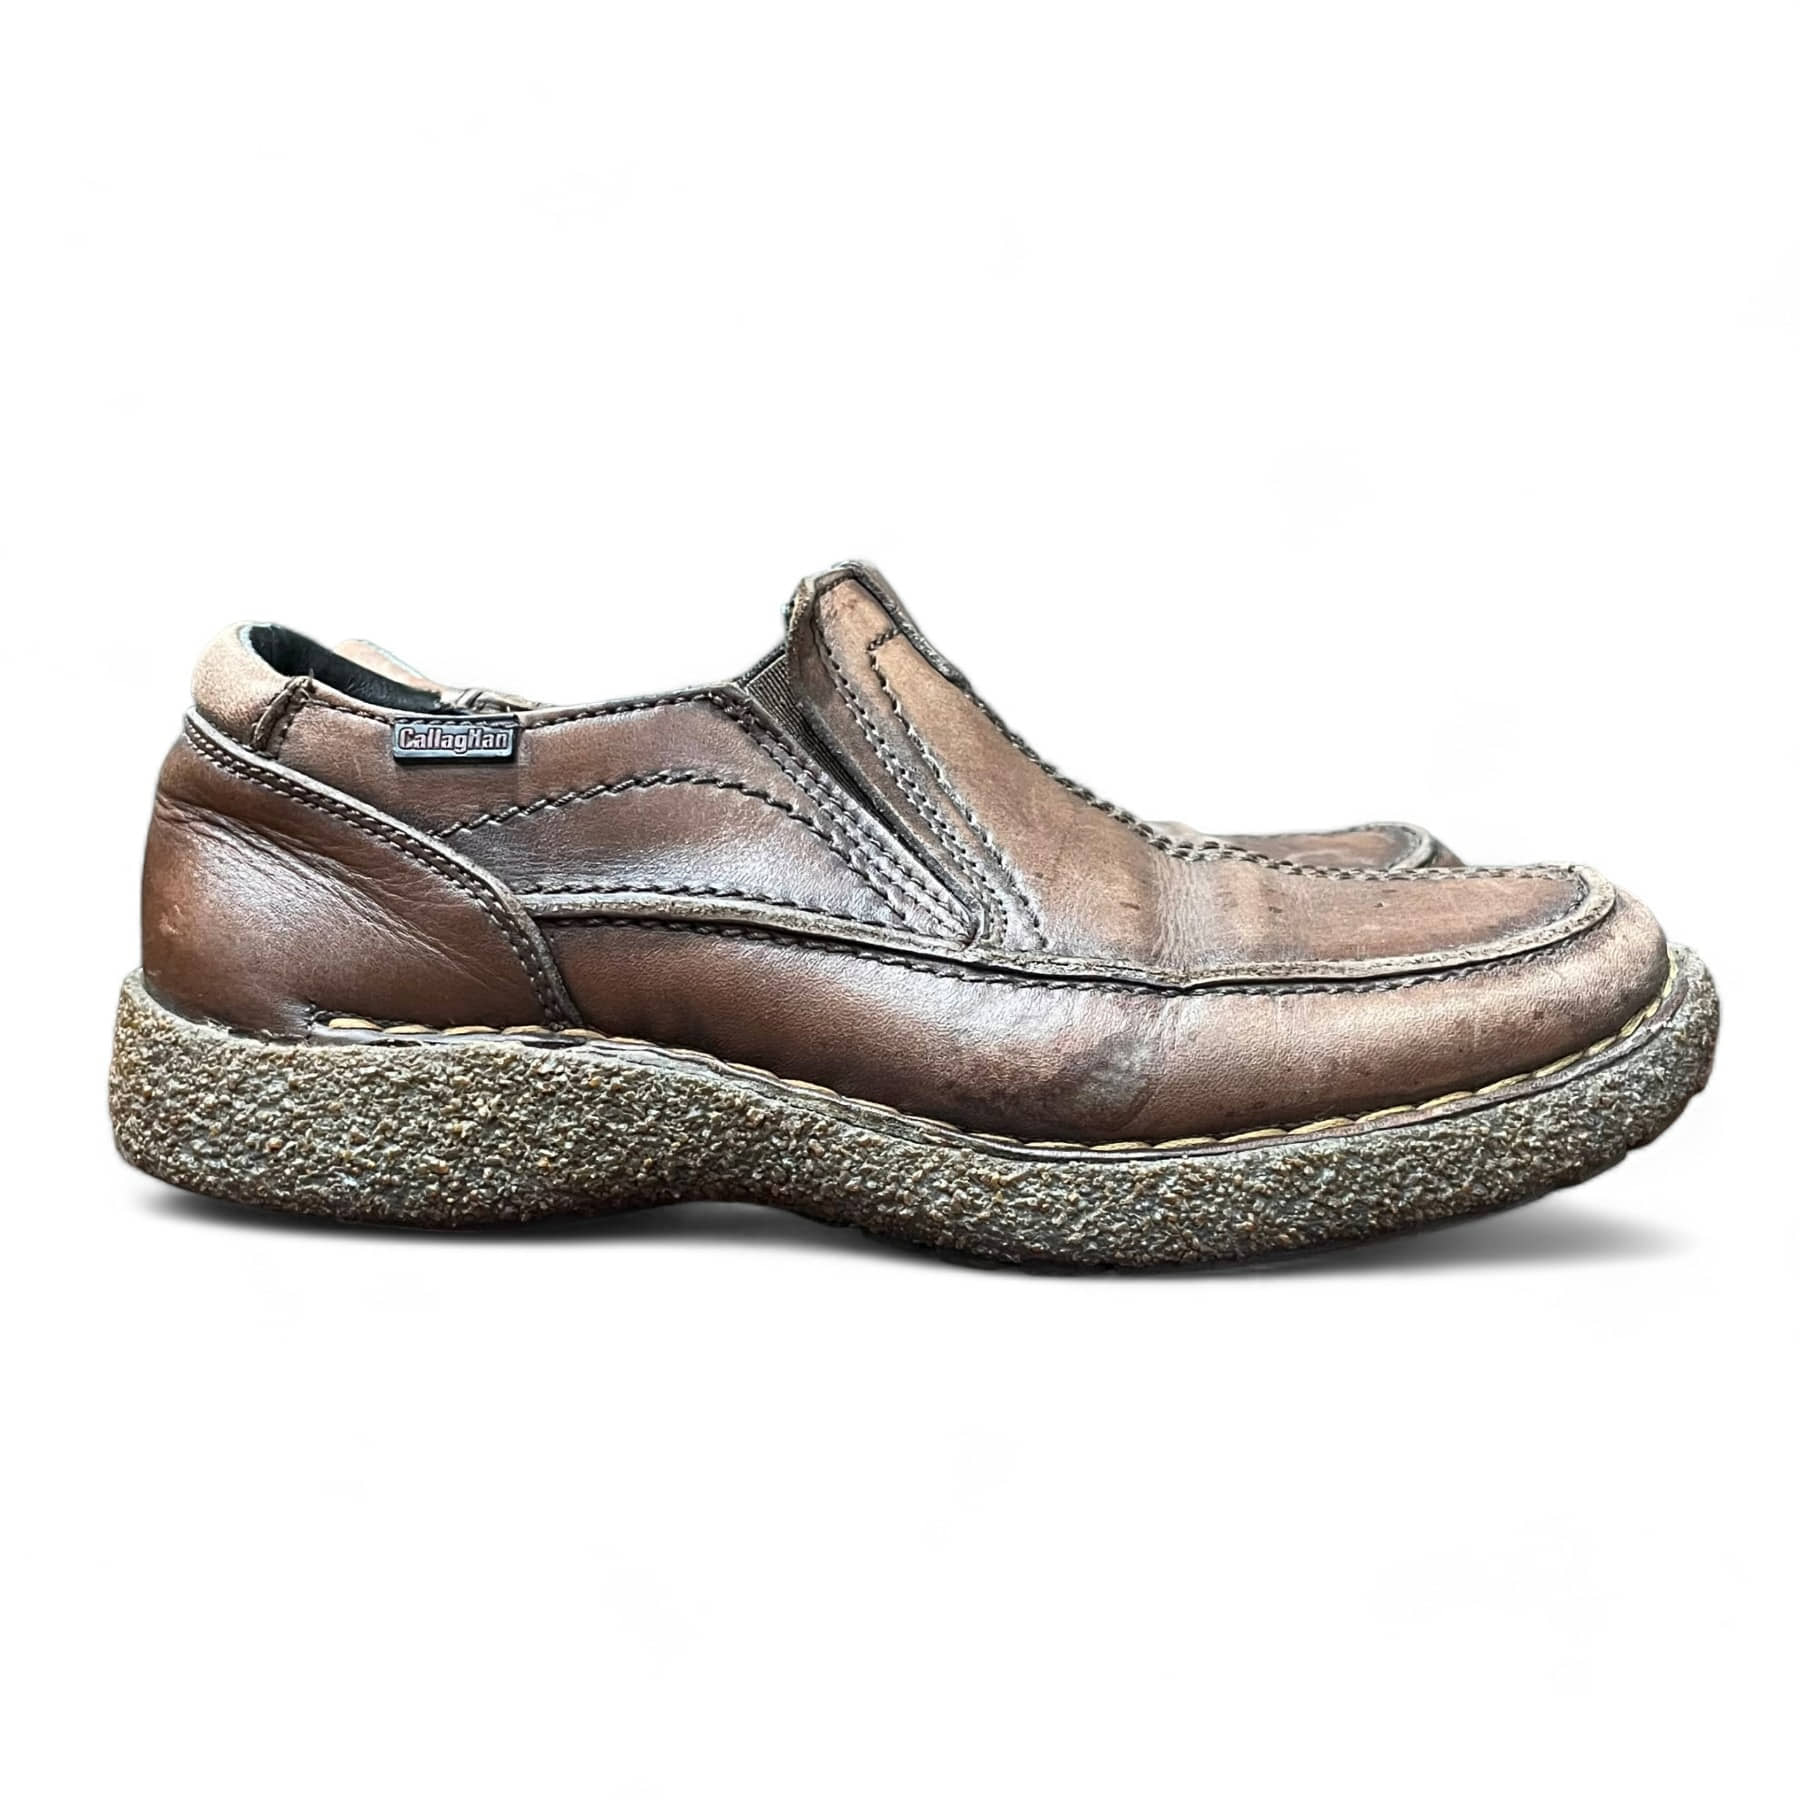 Callaghan Shoes (Made in SPAIN) - EU 40 (약 260~265mm)